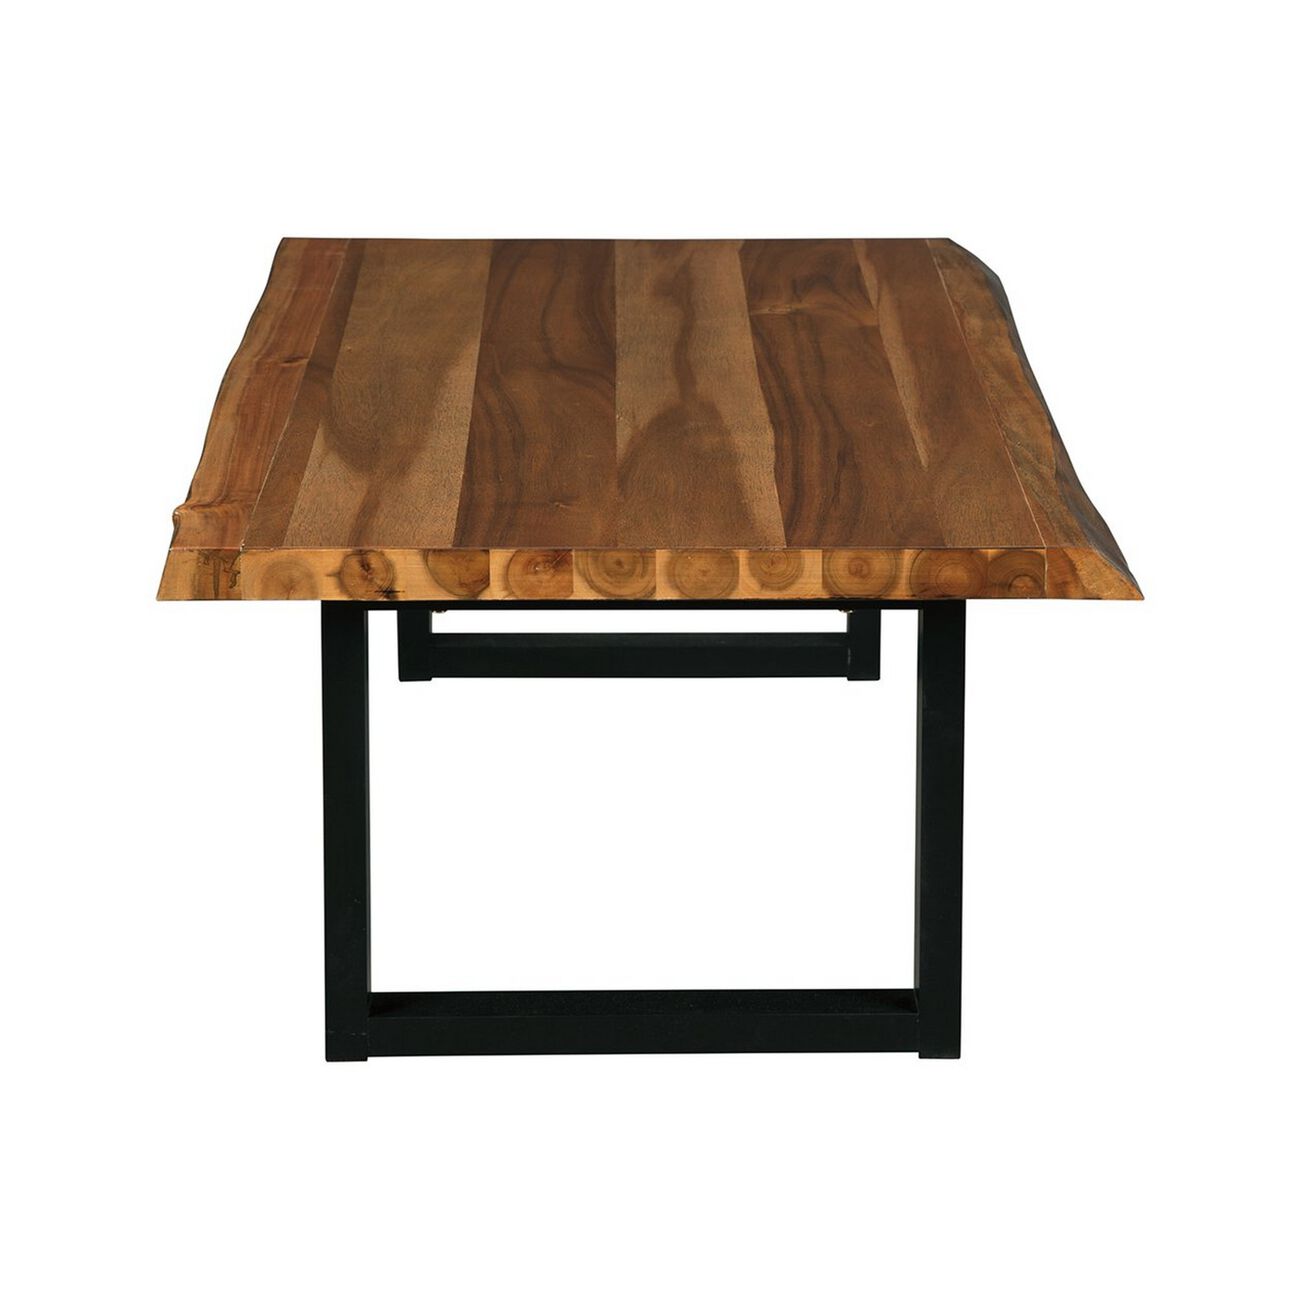 Rectangular Wooden Cocktail Table with Sled Legs, Brown and Black